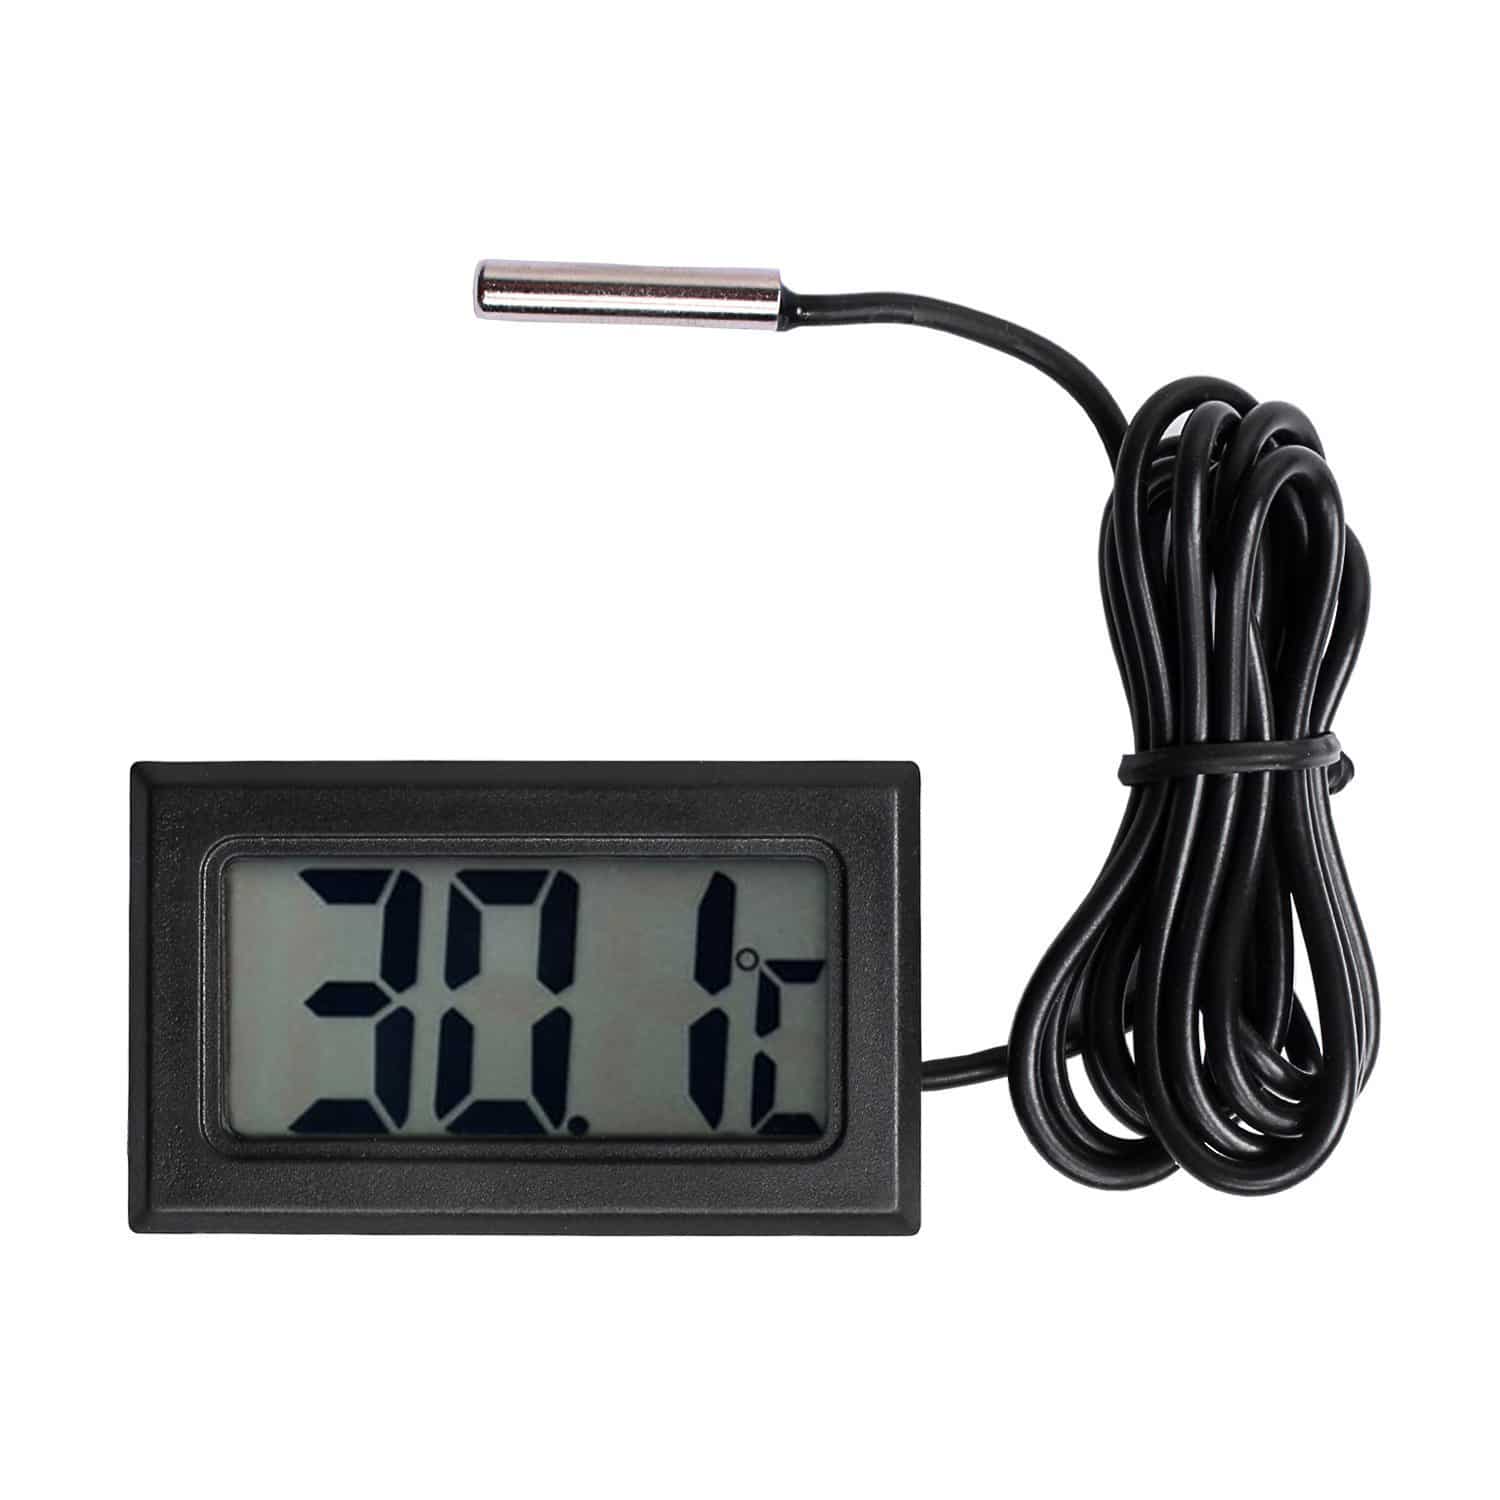 PHI1071342 – Digital LCD Thermometer Temperature Gauge with Probe